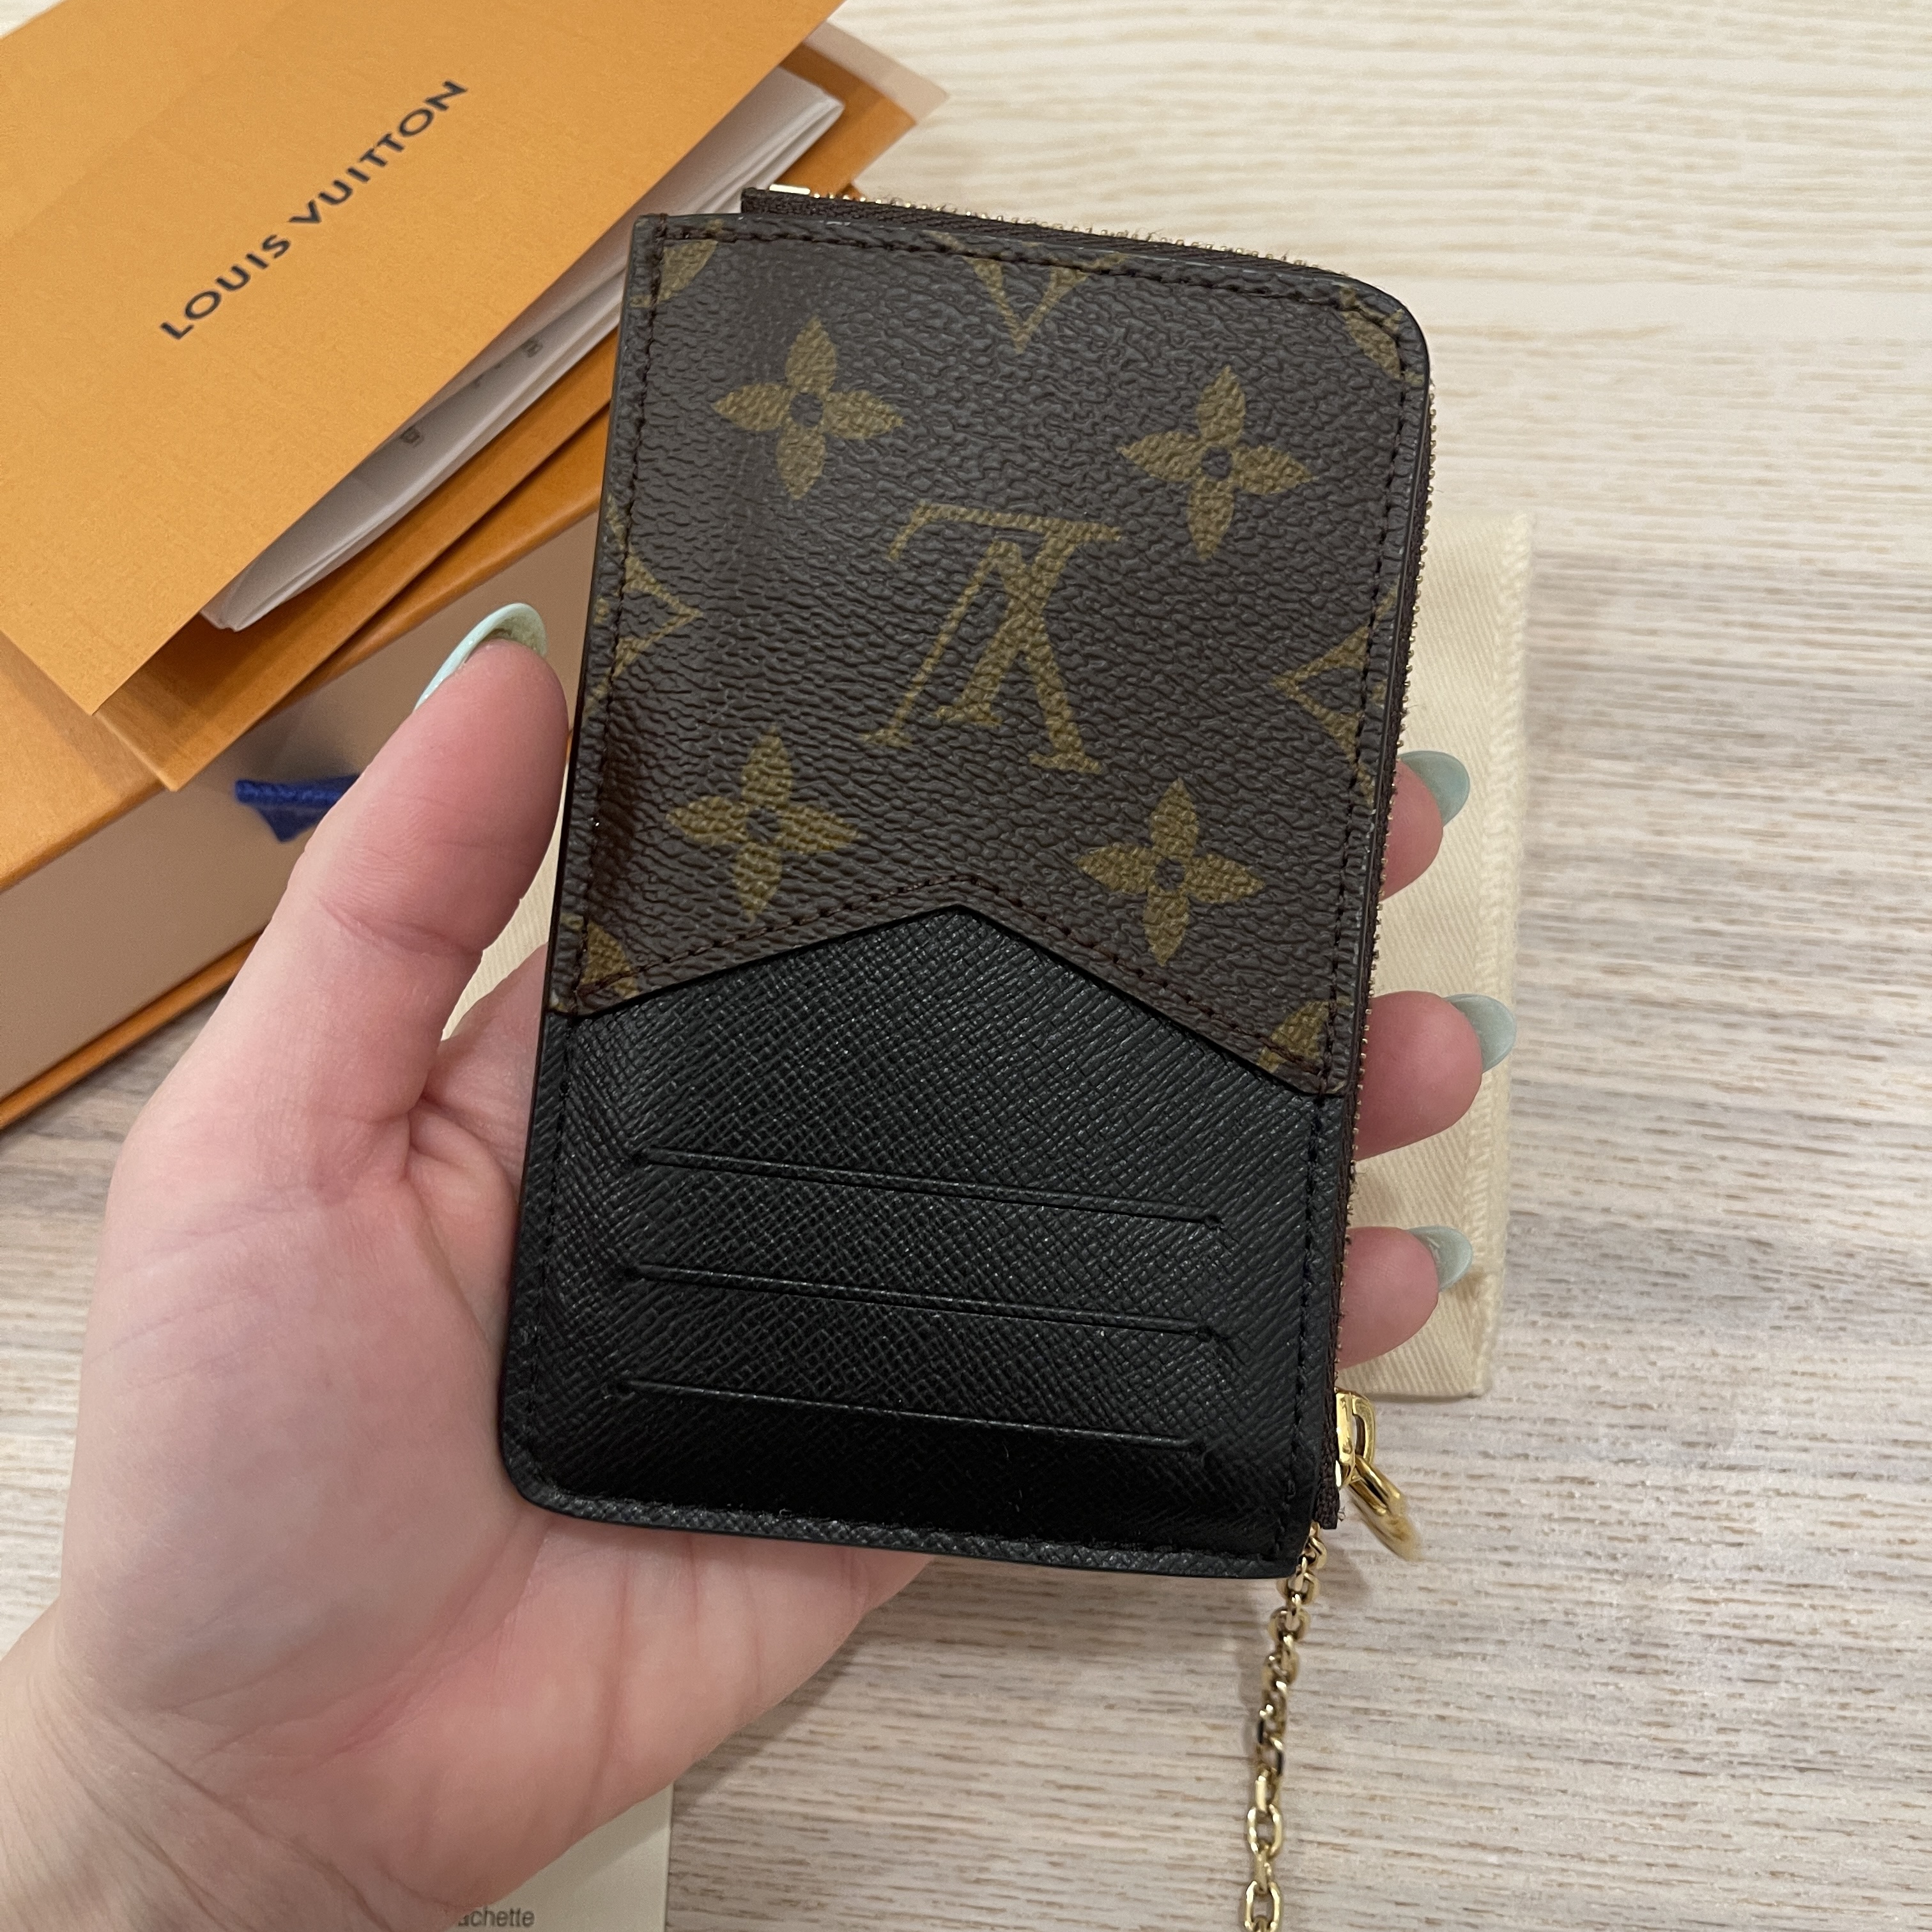 HER Authentic - Brand New / Sold out - Louis Vuitton Card Holder Recto Verso  is on our website for $650. Perfect every day wallet!